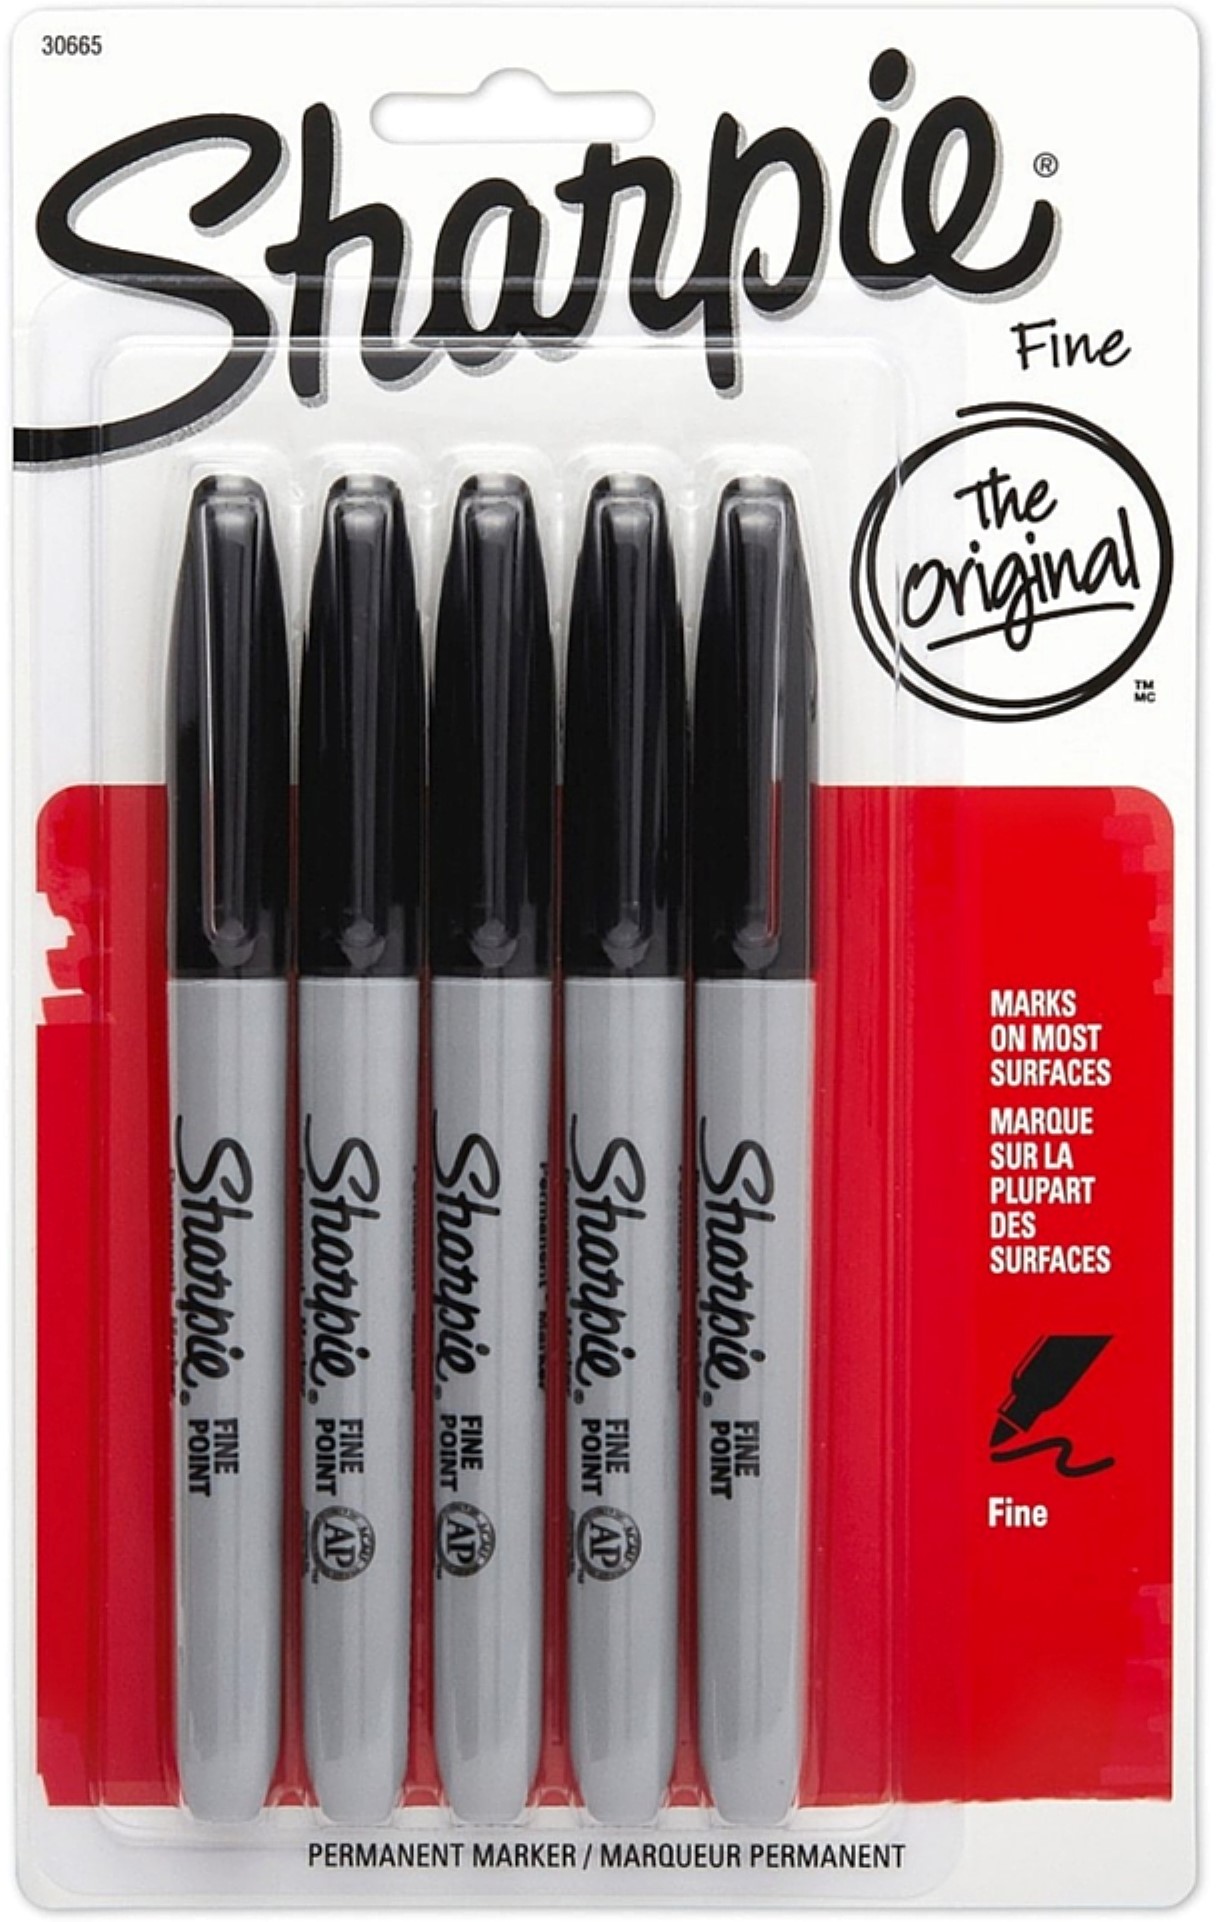 Sharpie Permanent Markers, Fine Point, Black, 5 Count - image 1 of 10